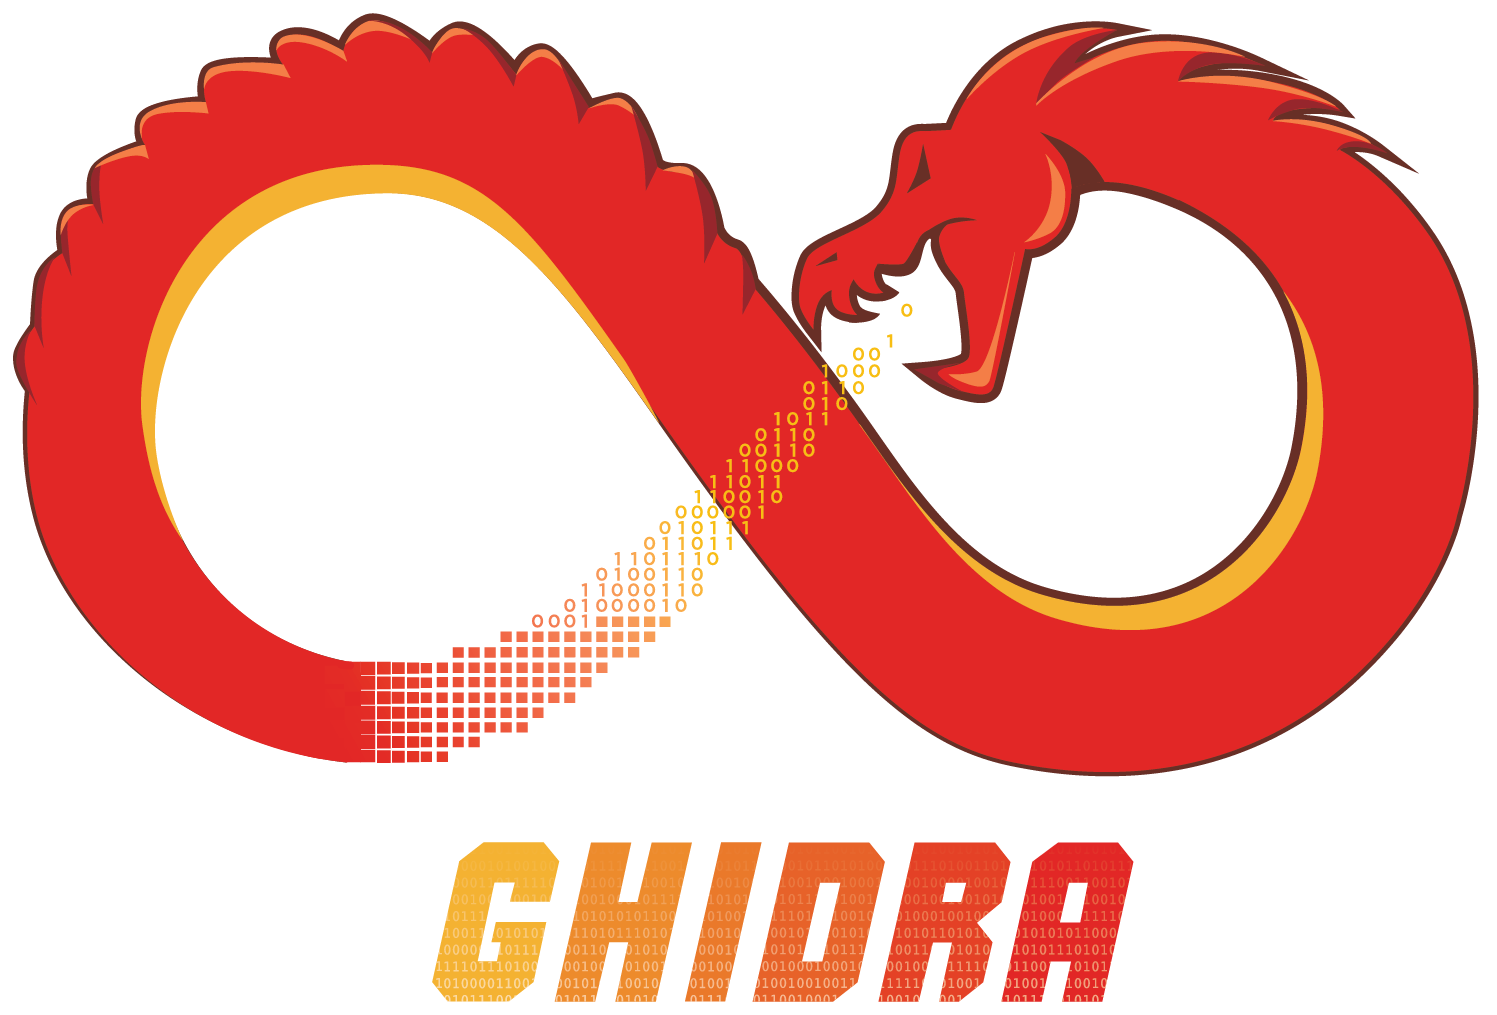 How to Install Ghidra in Linux Manjaro - Featured